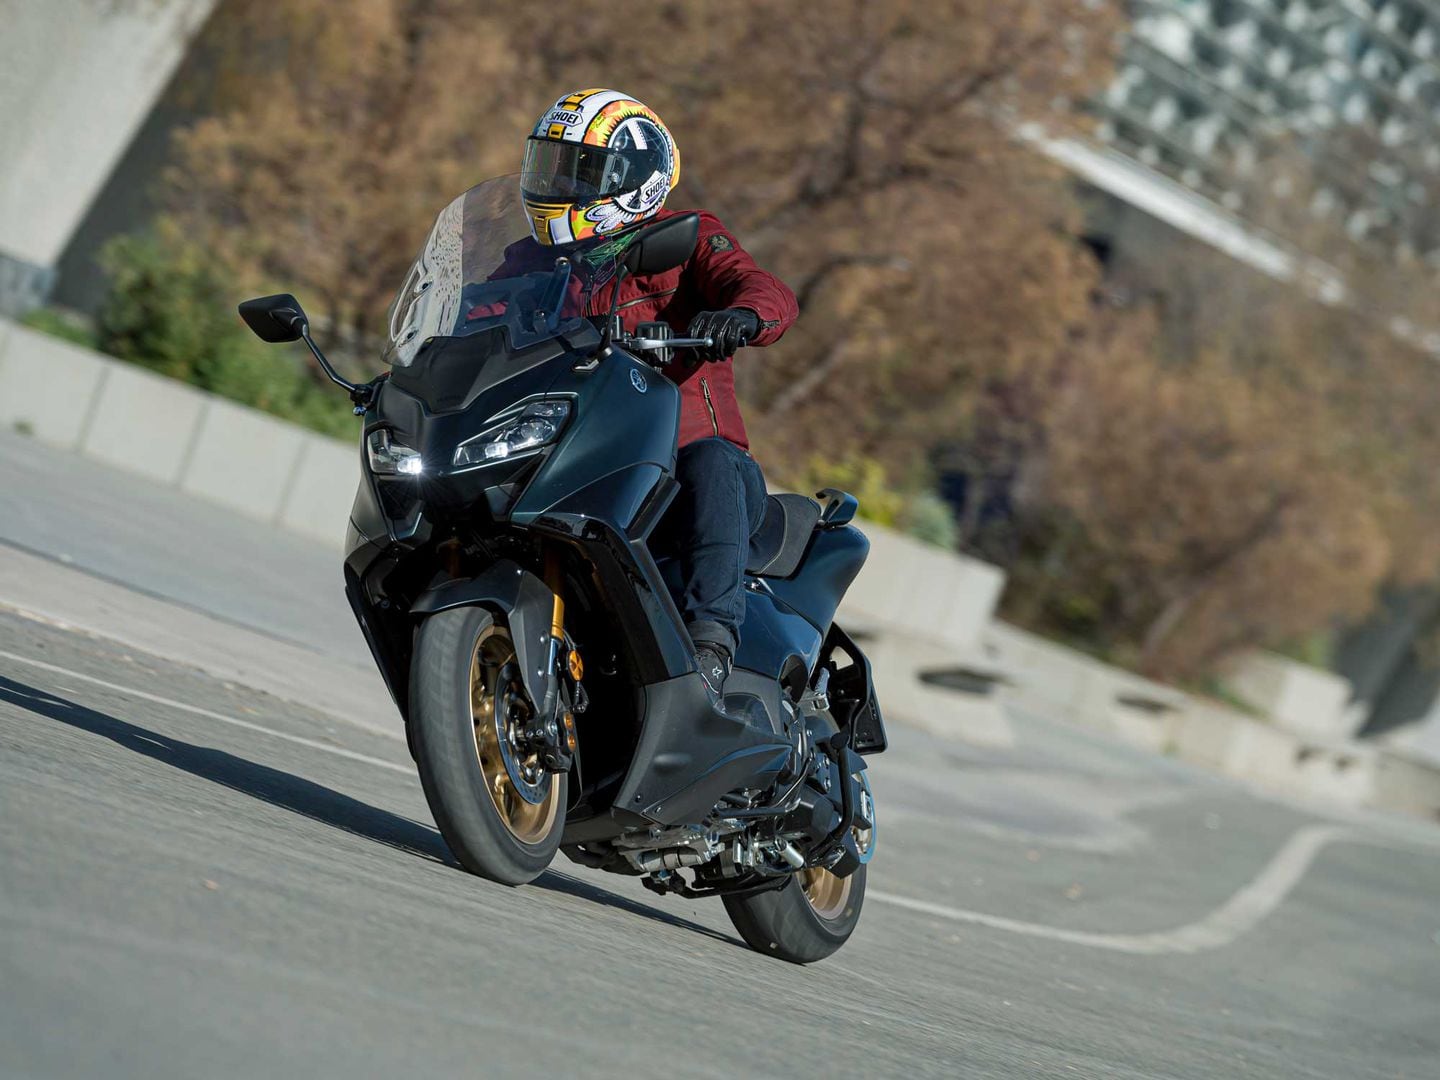 Yamaha TMAX goes to the max! Top-spec scoot gets more tech and a